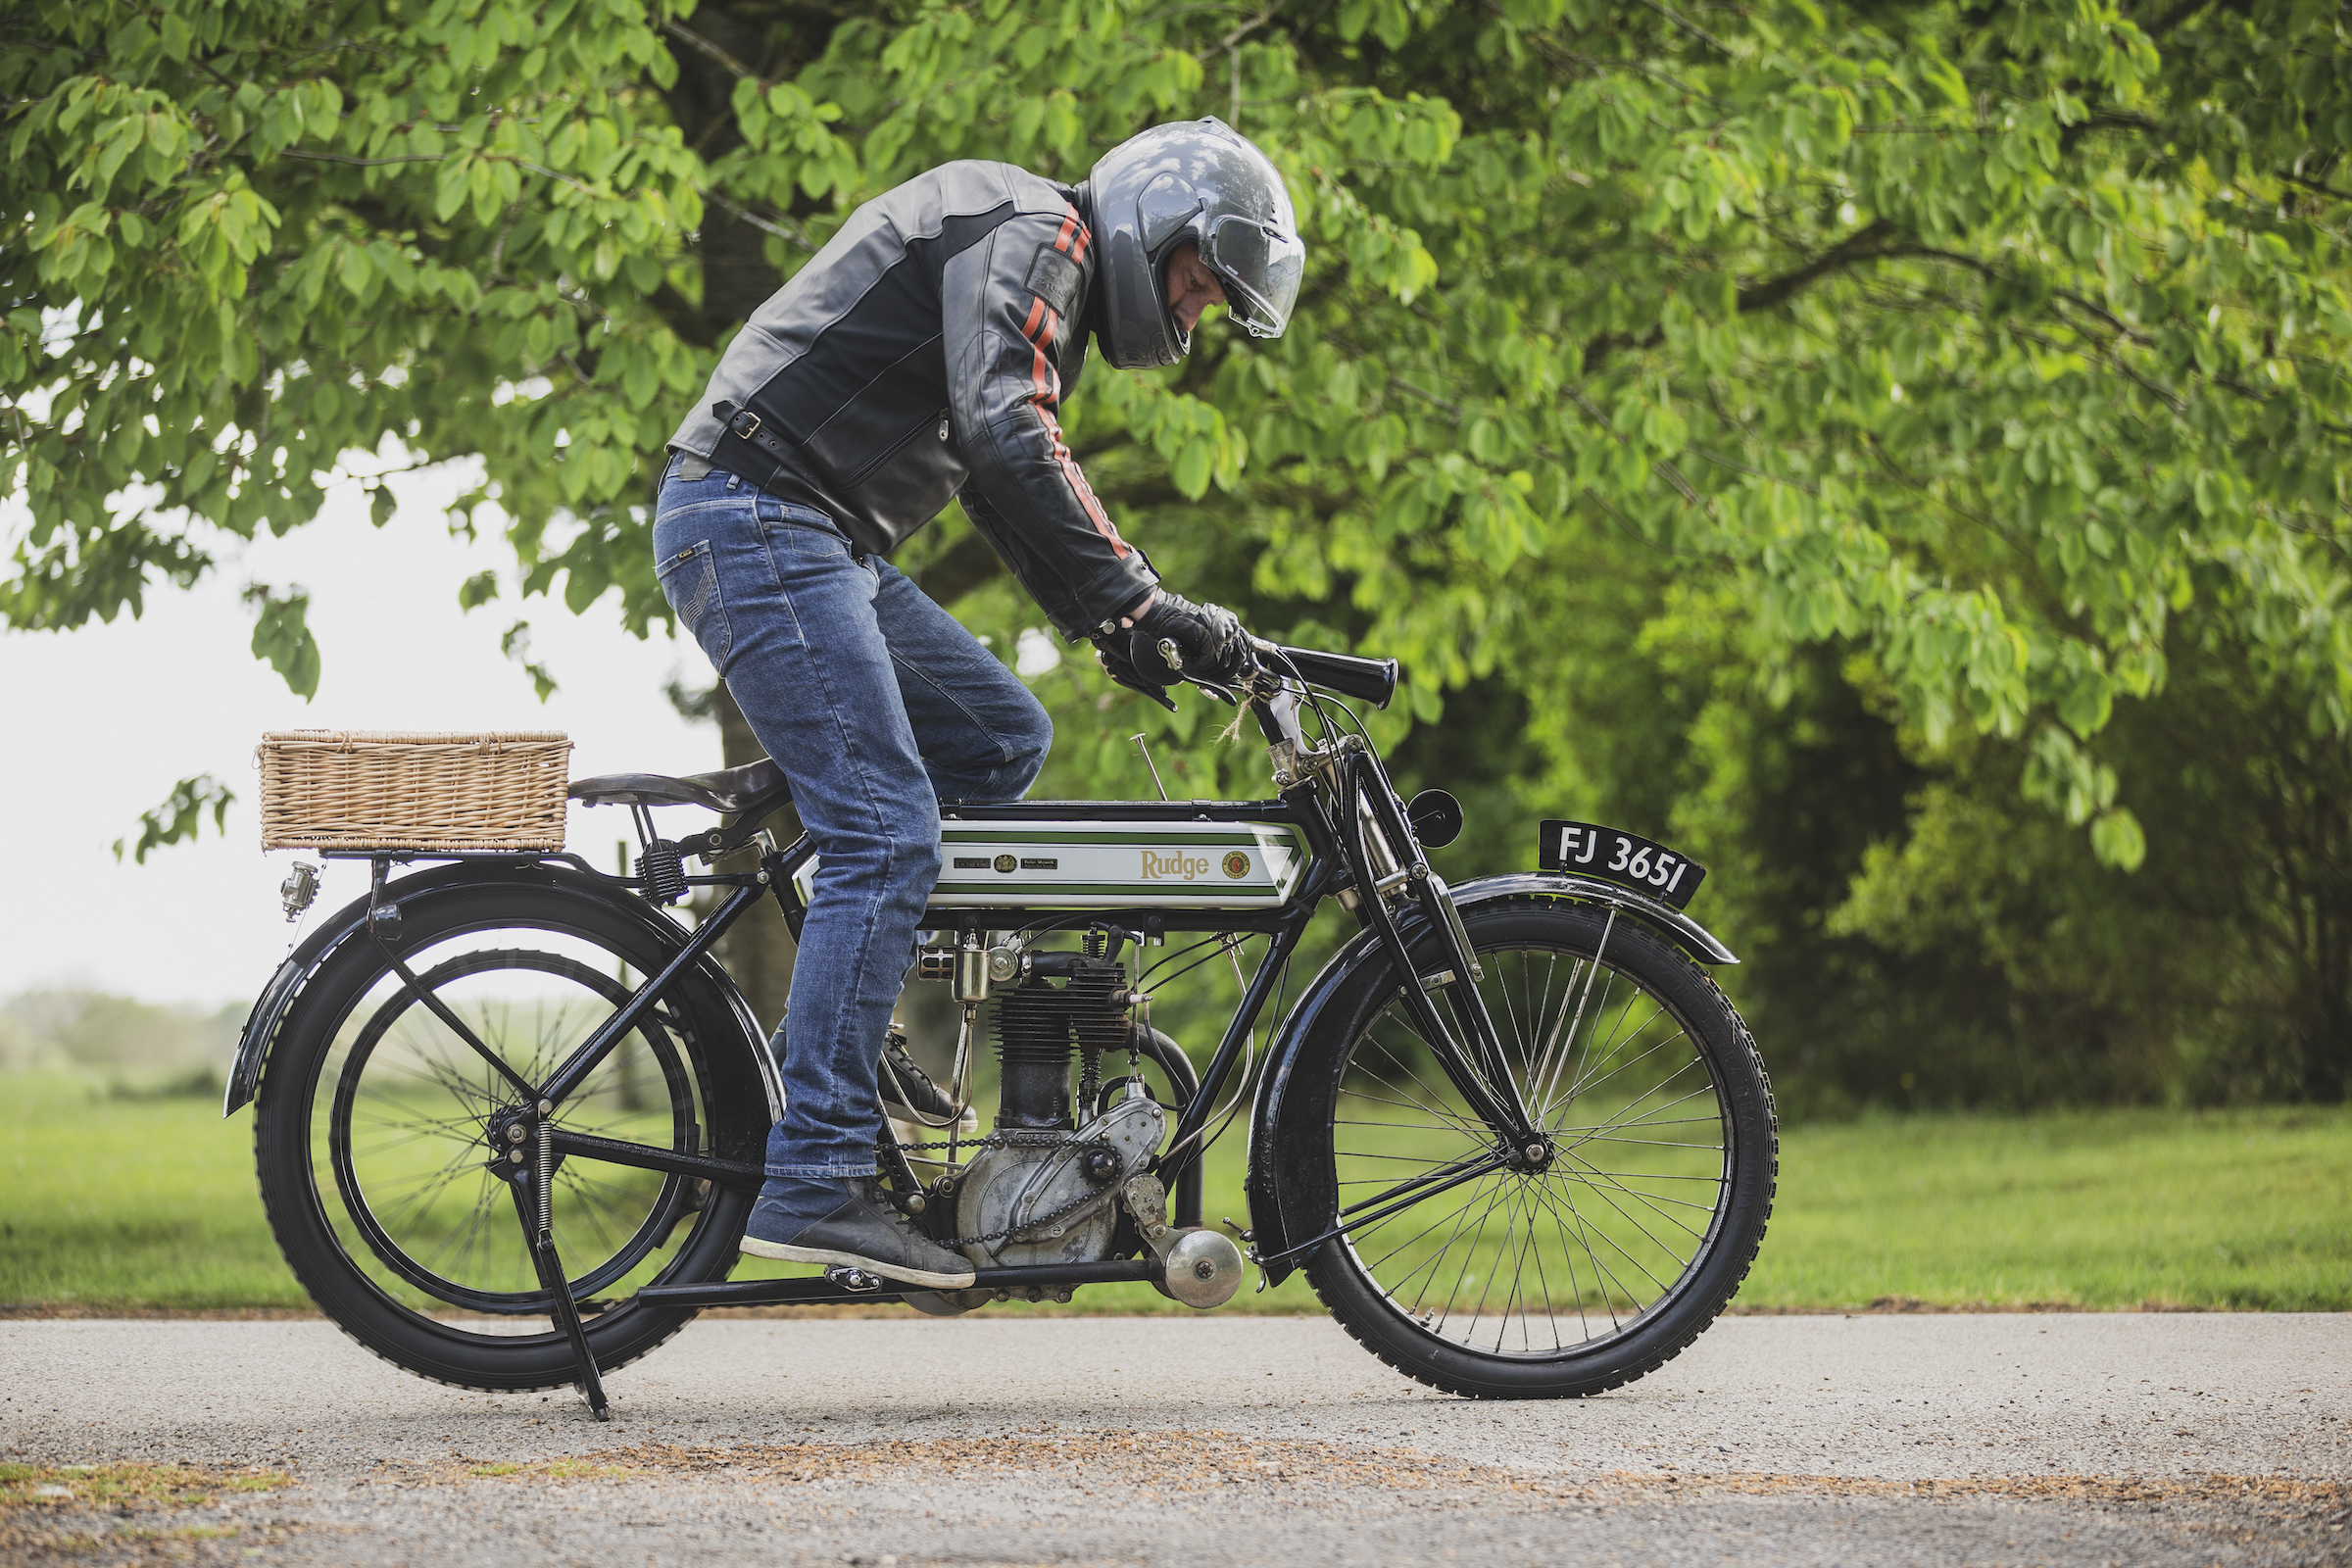 Rudge match: The ins and outs of owning a pioneer motorcycle